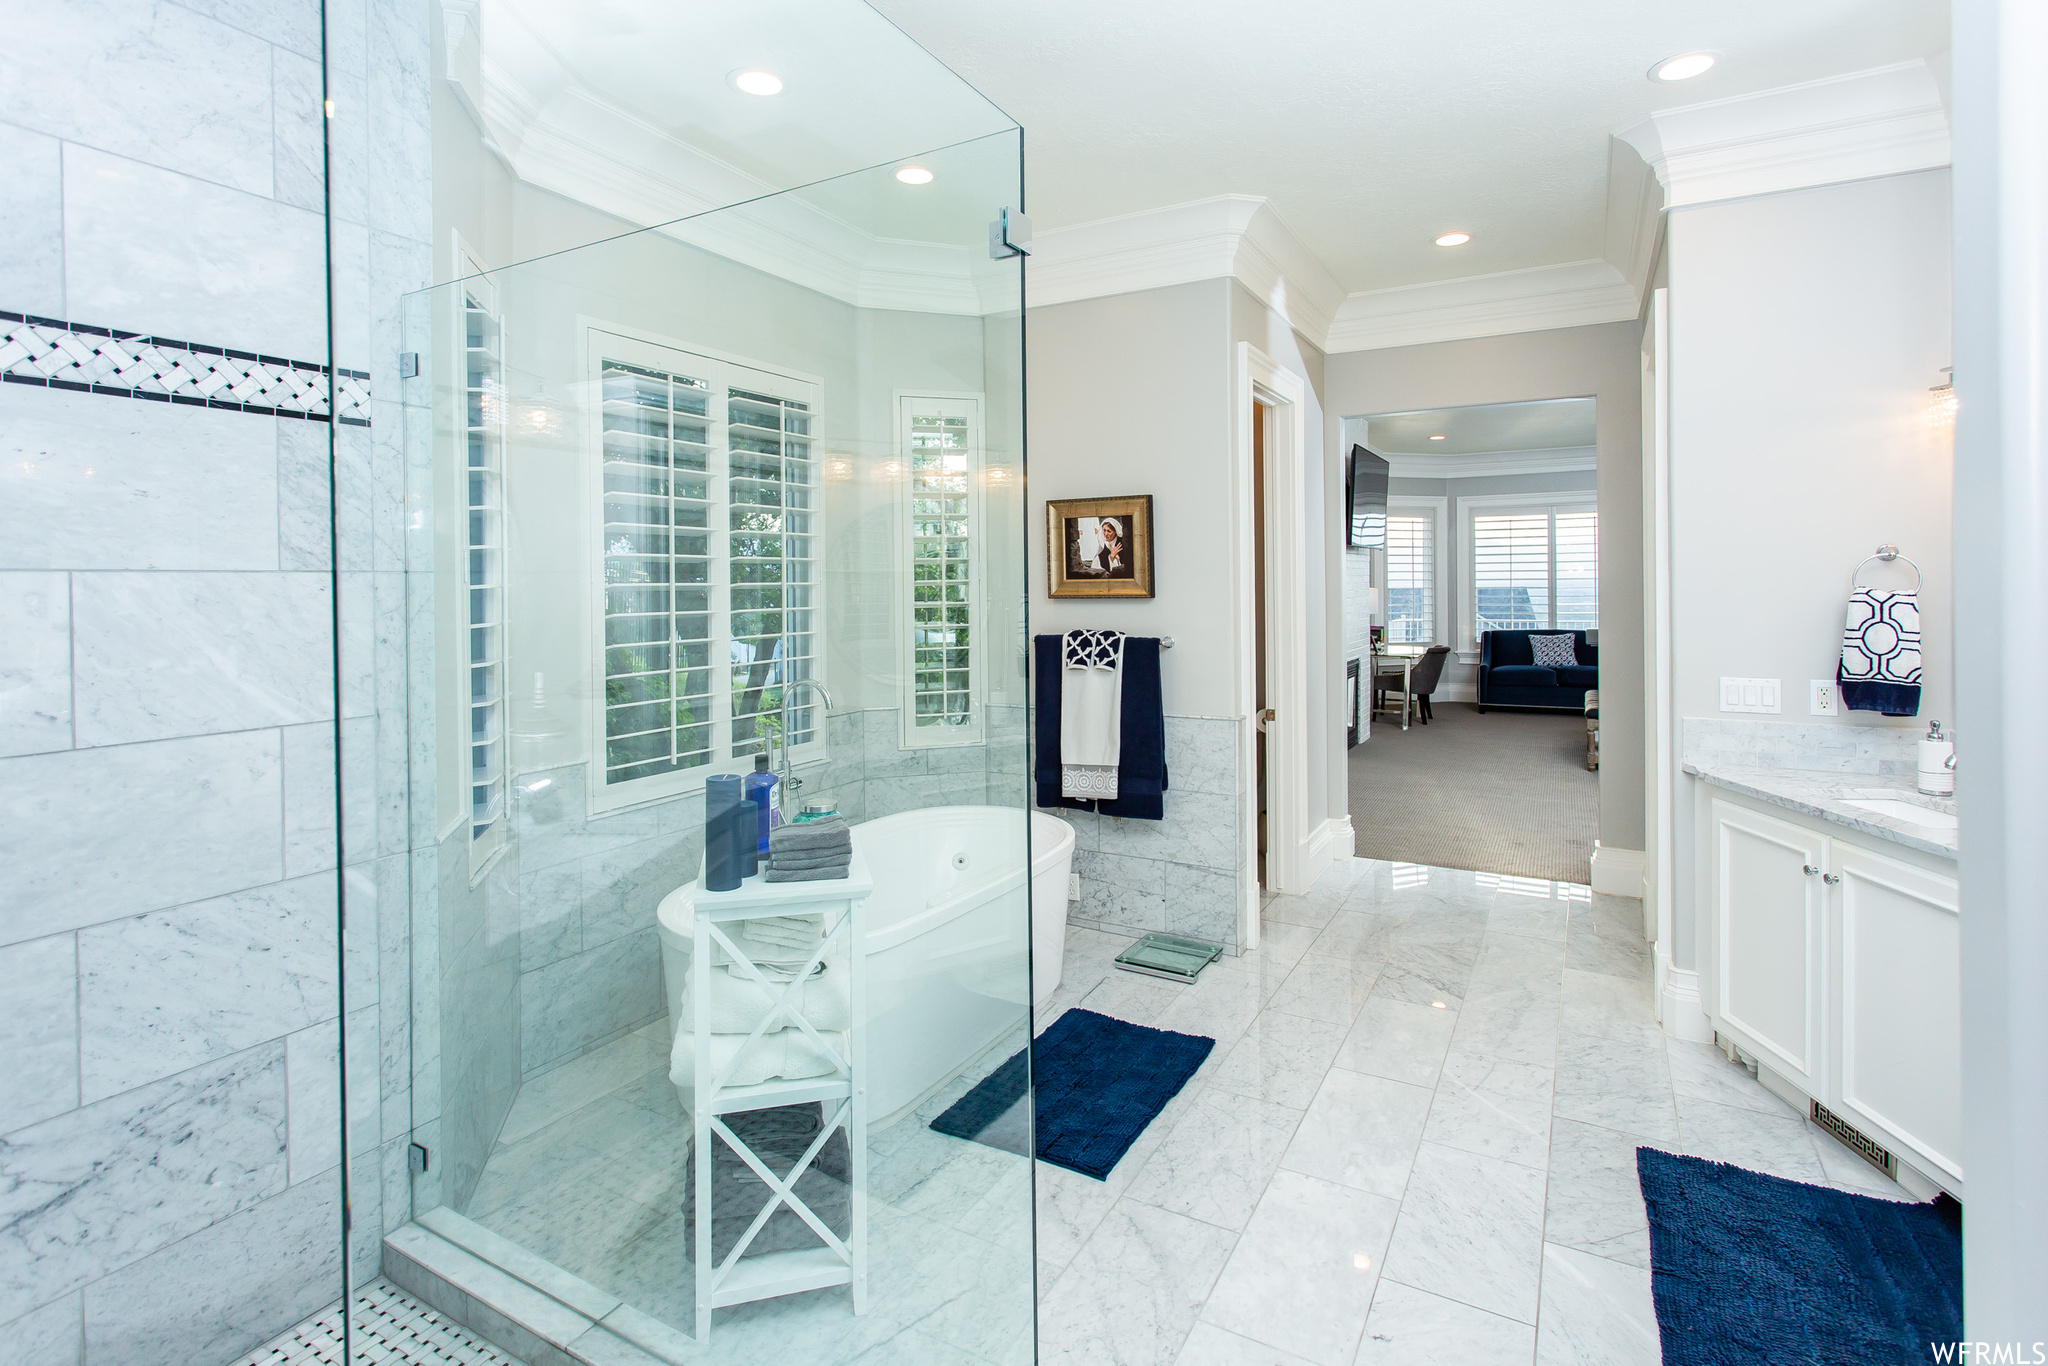 The master bathroom has marble floors, custom cabinets, soaker garden tub and separate Euro shower.